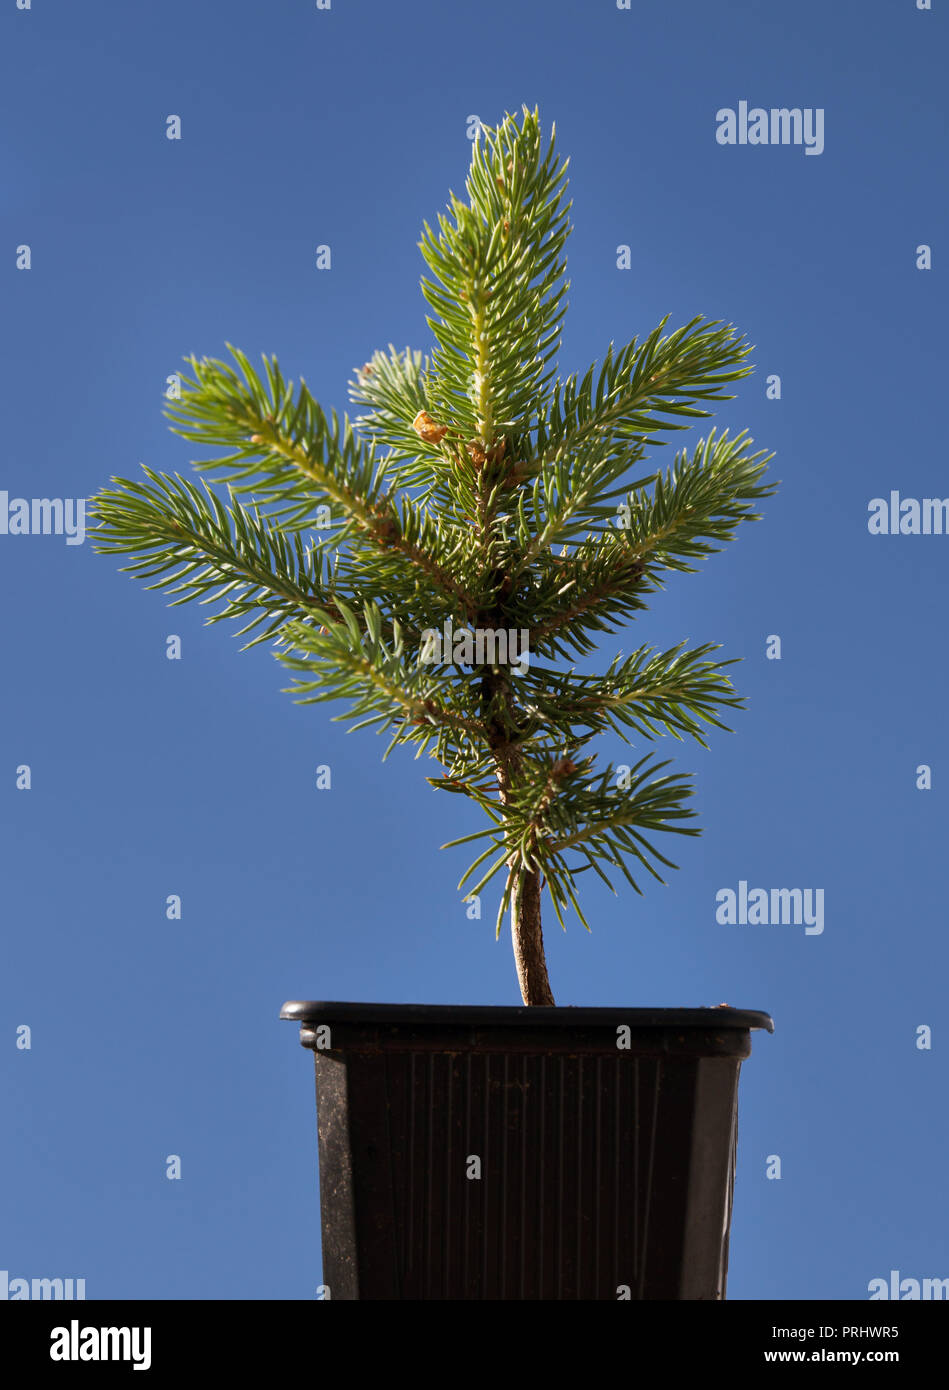 Christmas tree in a pot. Stock Photo